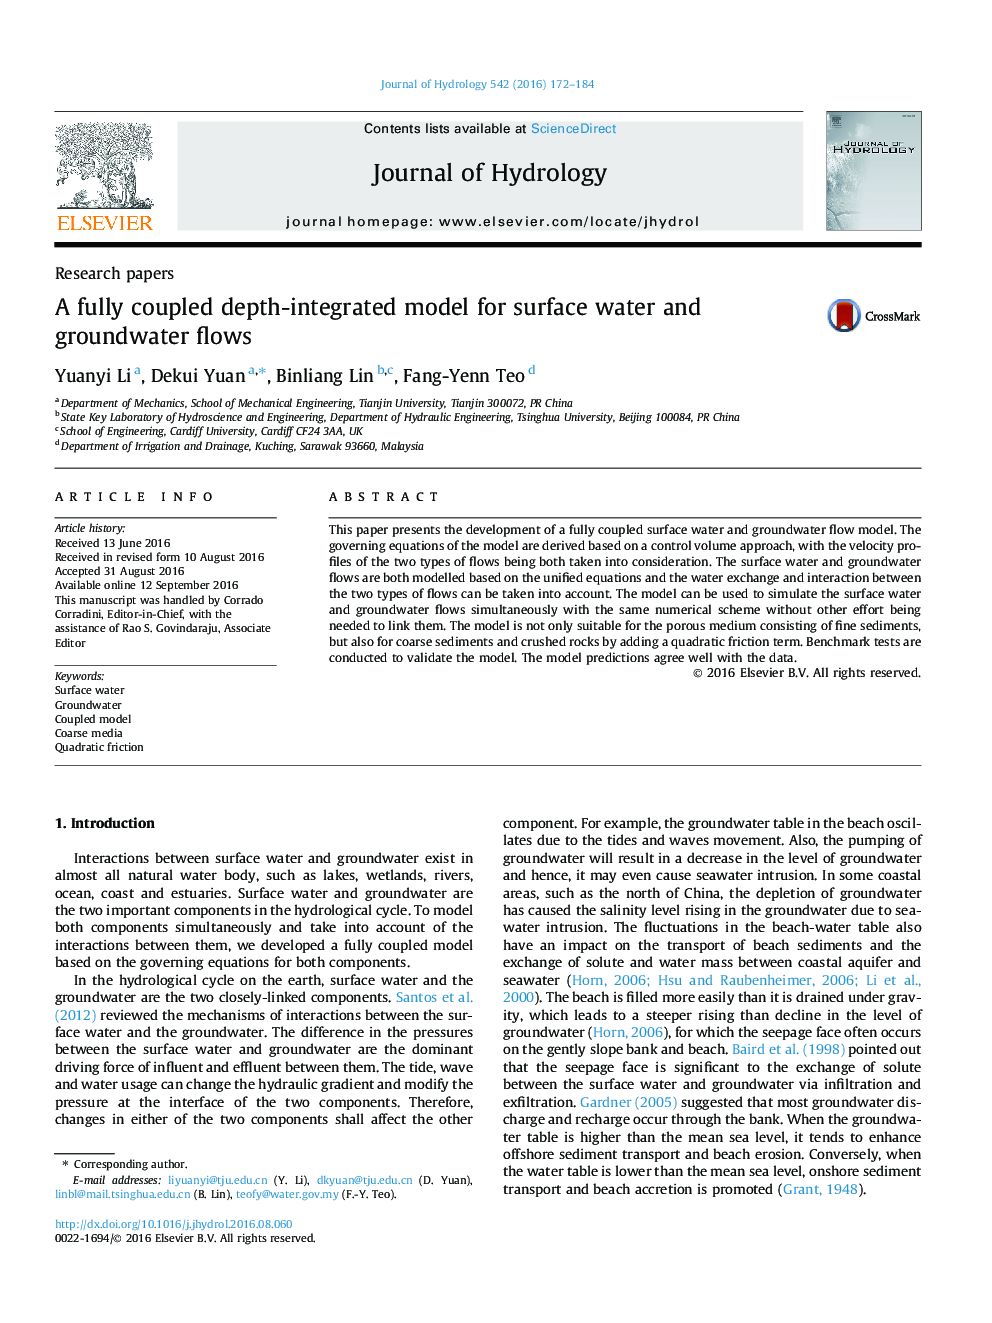 Research papersA fully coupled depth-integrated model for surface water and groundwater flows